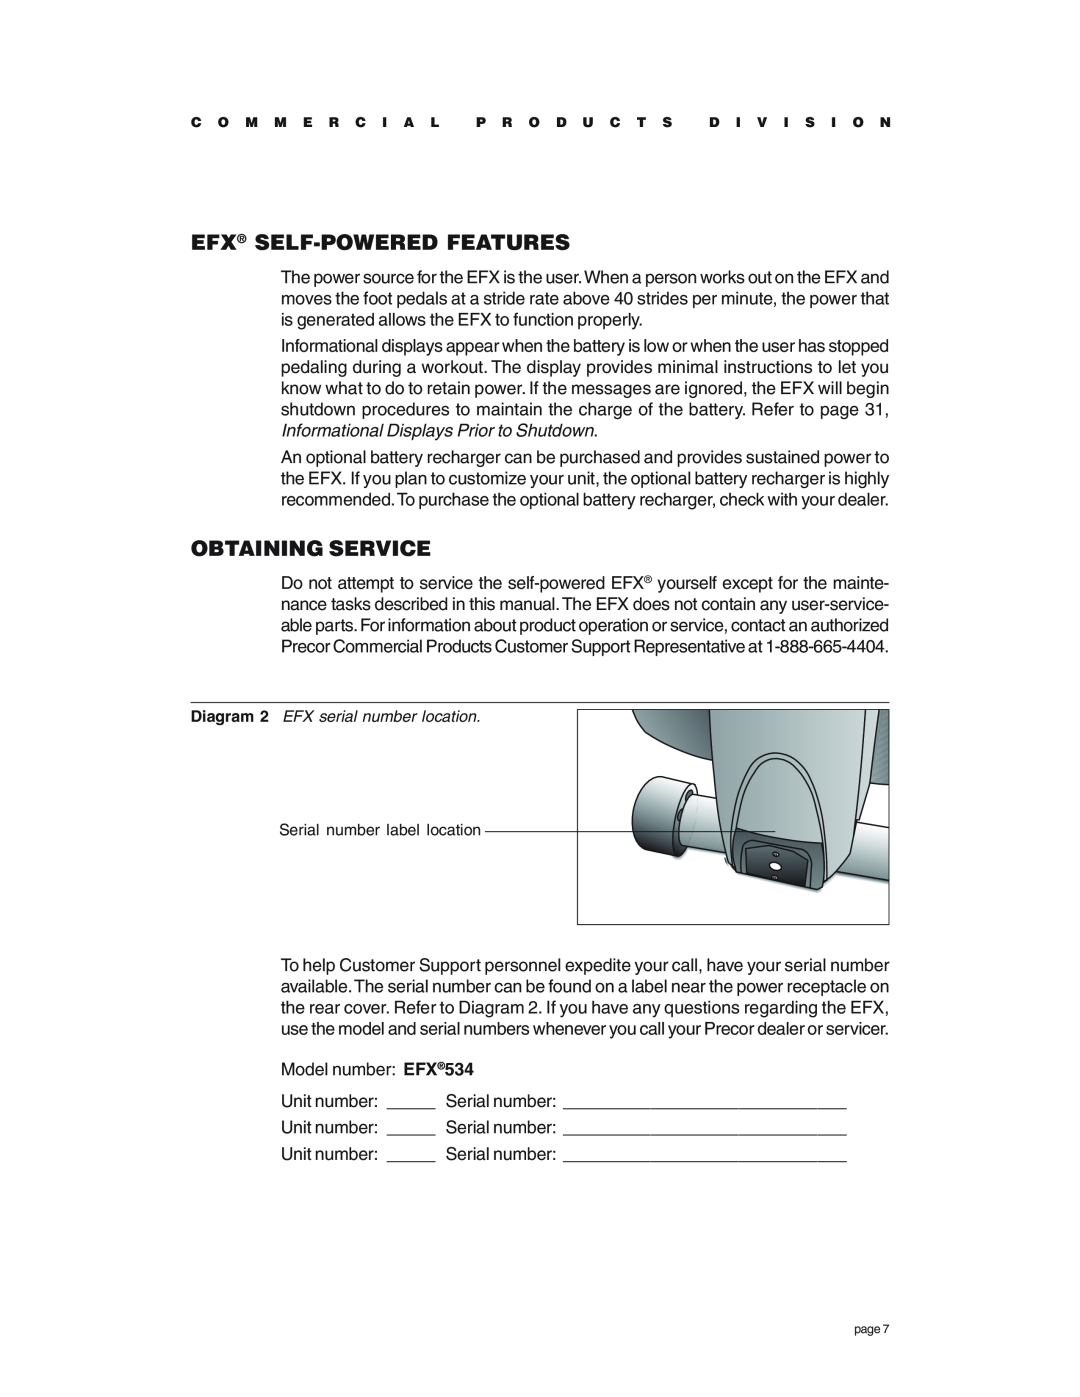 Precor EFX534 owner manual Efx Self-Powered Features, Obtaining Service 